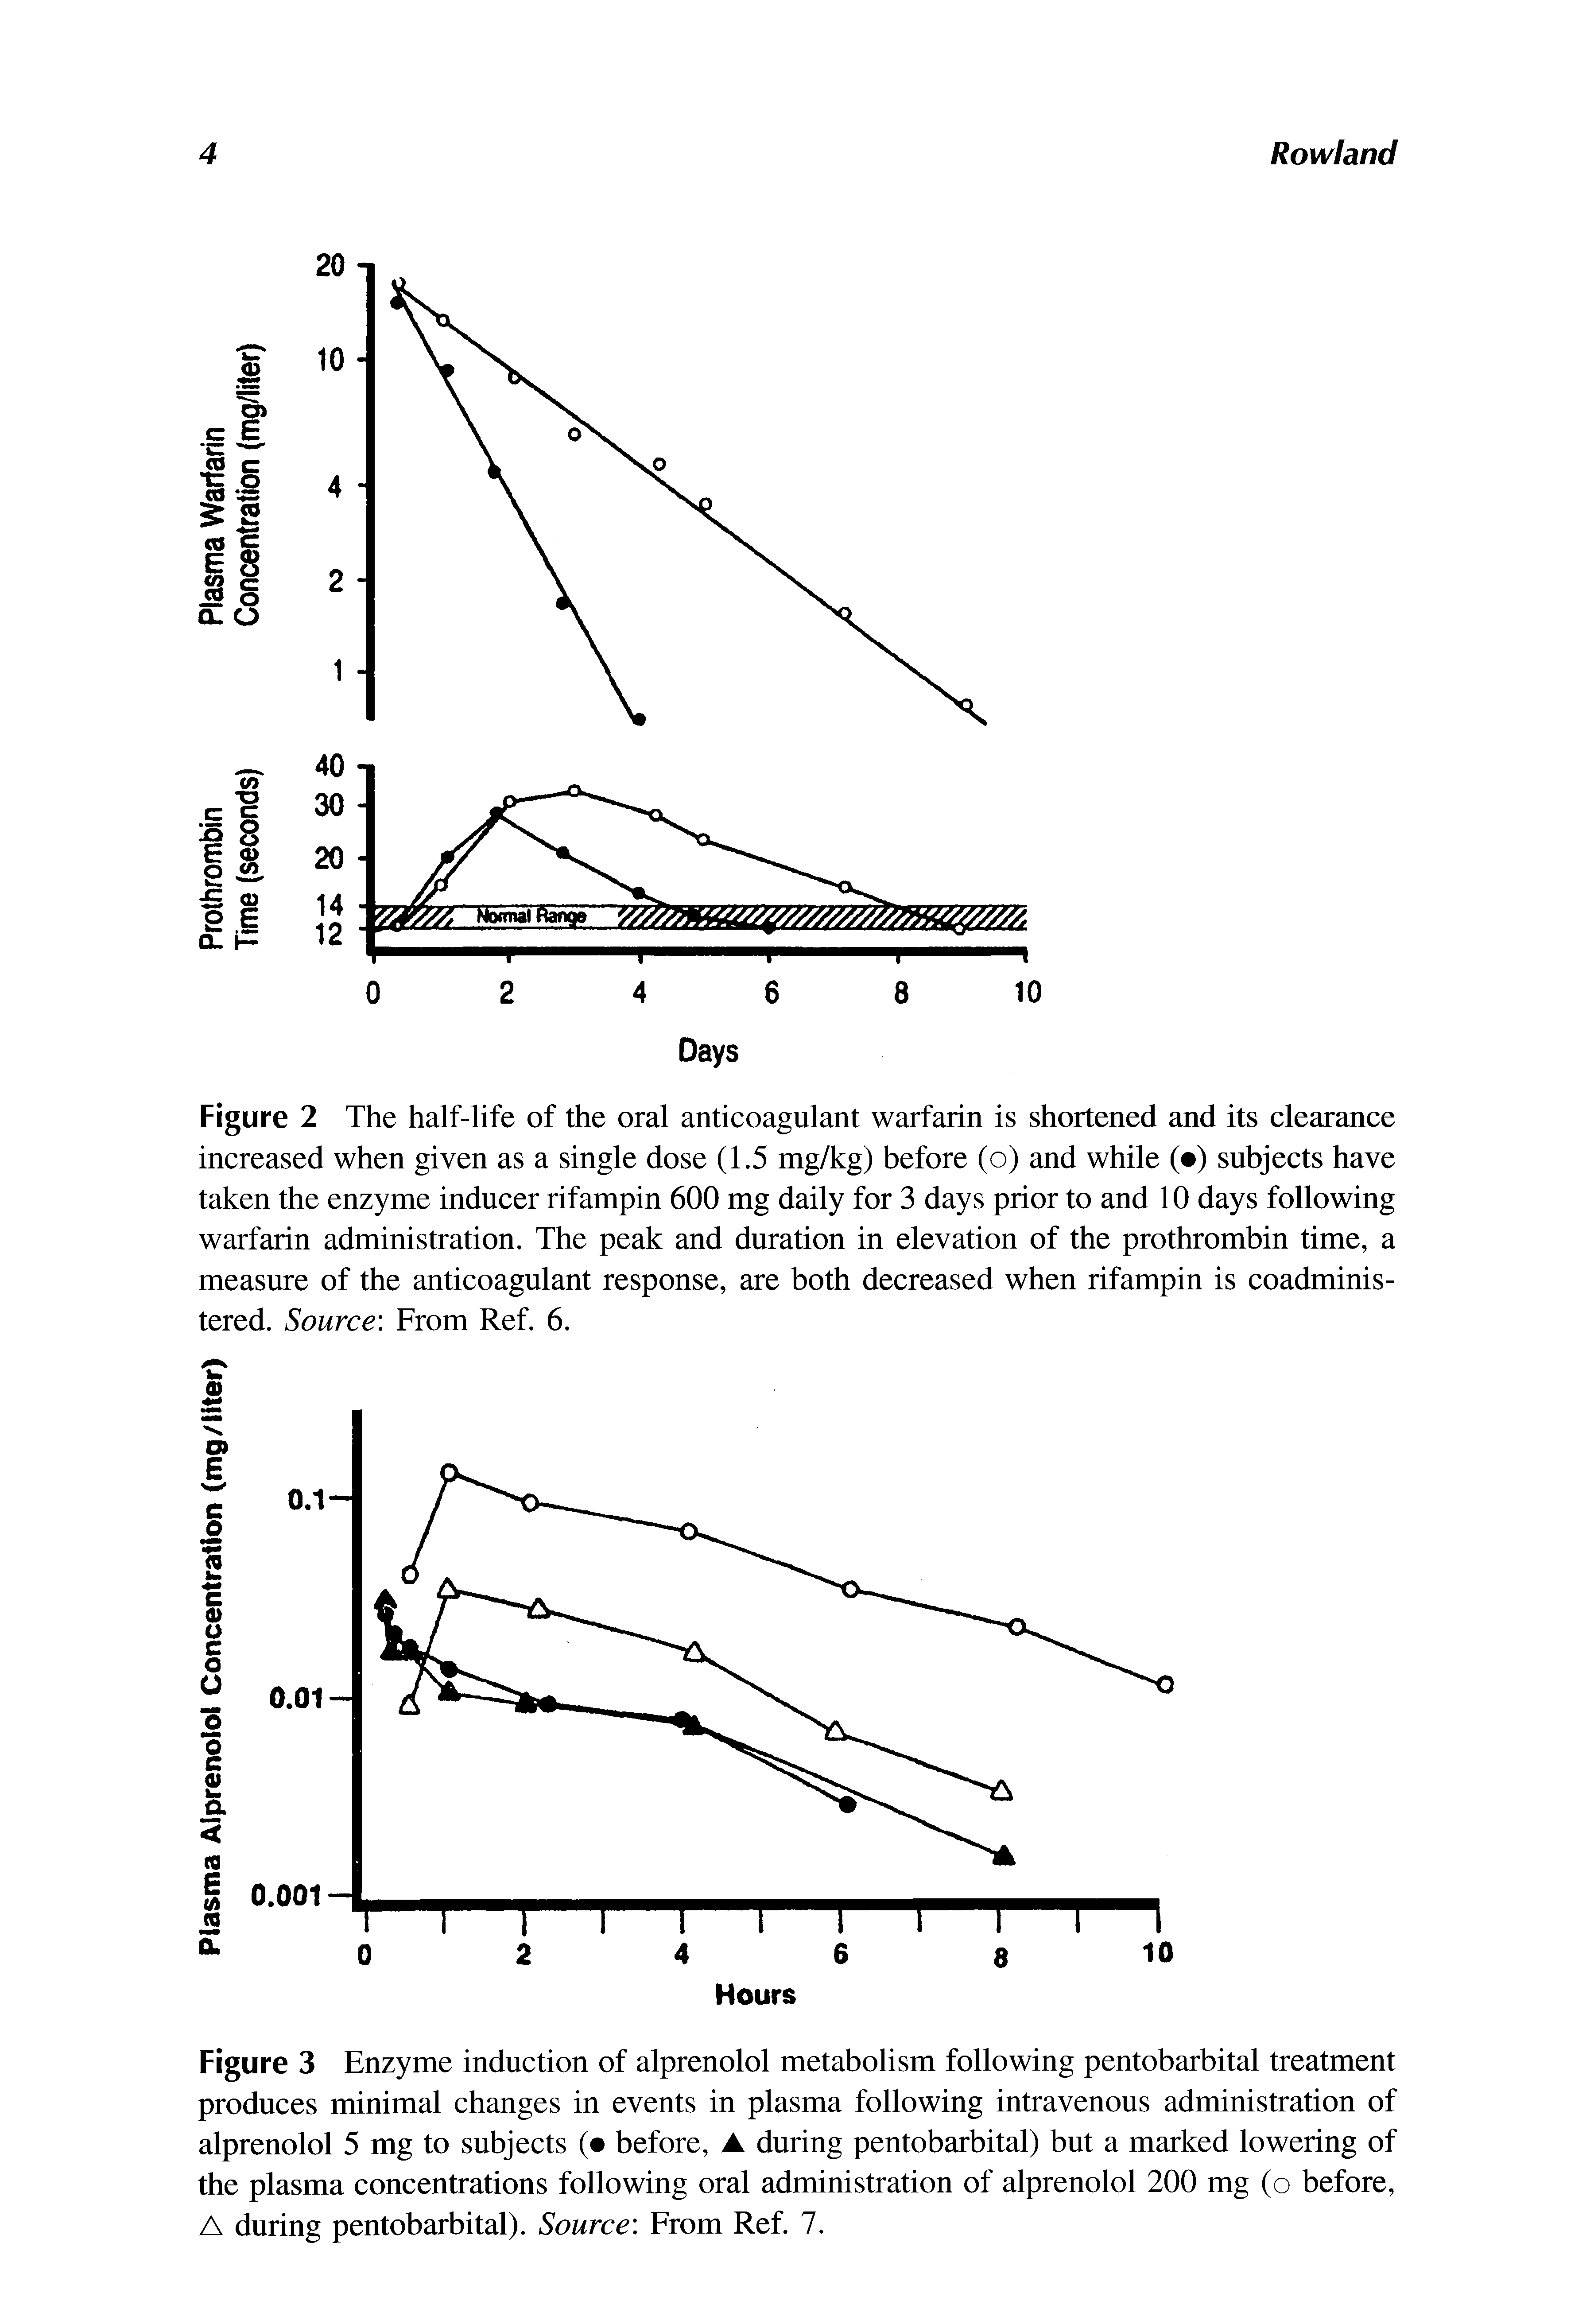 Figure 2 The half-life of the oral anticoagulant warfarin is shortened and its clearance increased when given as a single dose (1.5 mg/kg) before (o) and while ( ) subjects have taken the enzyme inducer rifampin 600 mg daily for 3 days prior to and 10 days following warfarin administration. The peak and duration in elevation of the prothrombin time, a measure of the anticoagulant response, are both decreased when rifampin is coadministered. Source From Ref. 6.